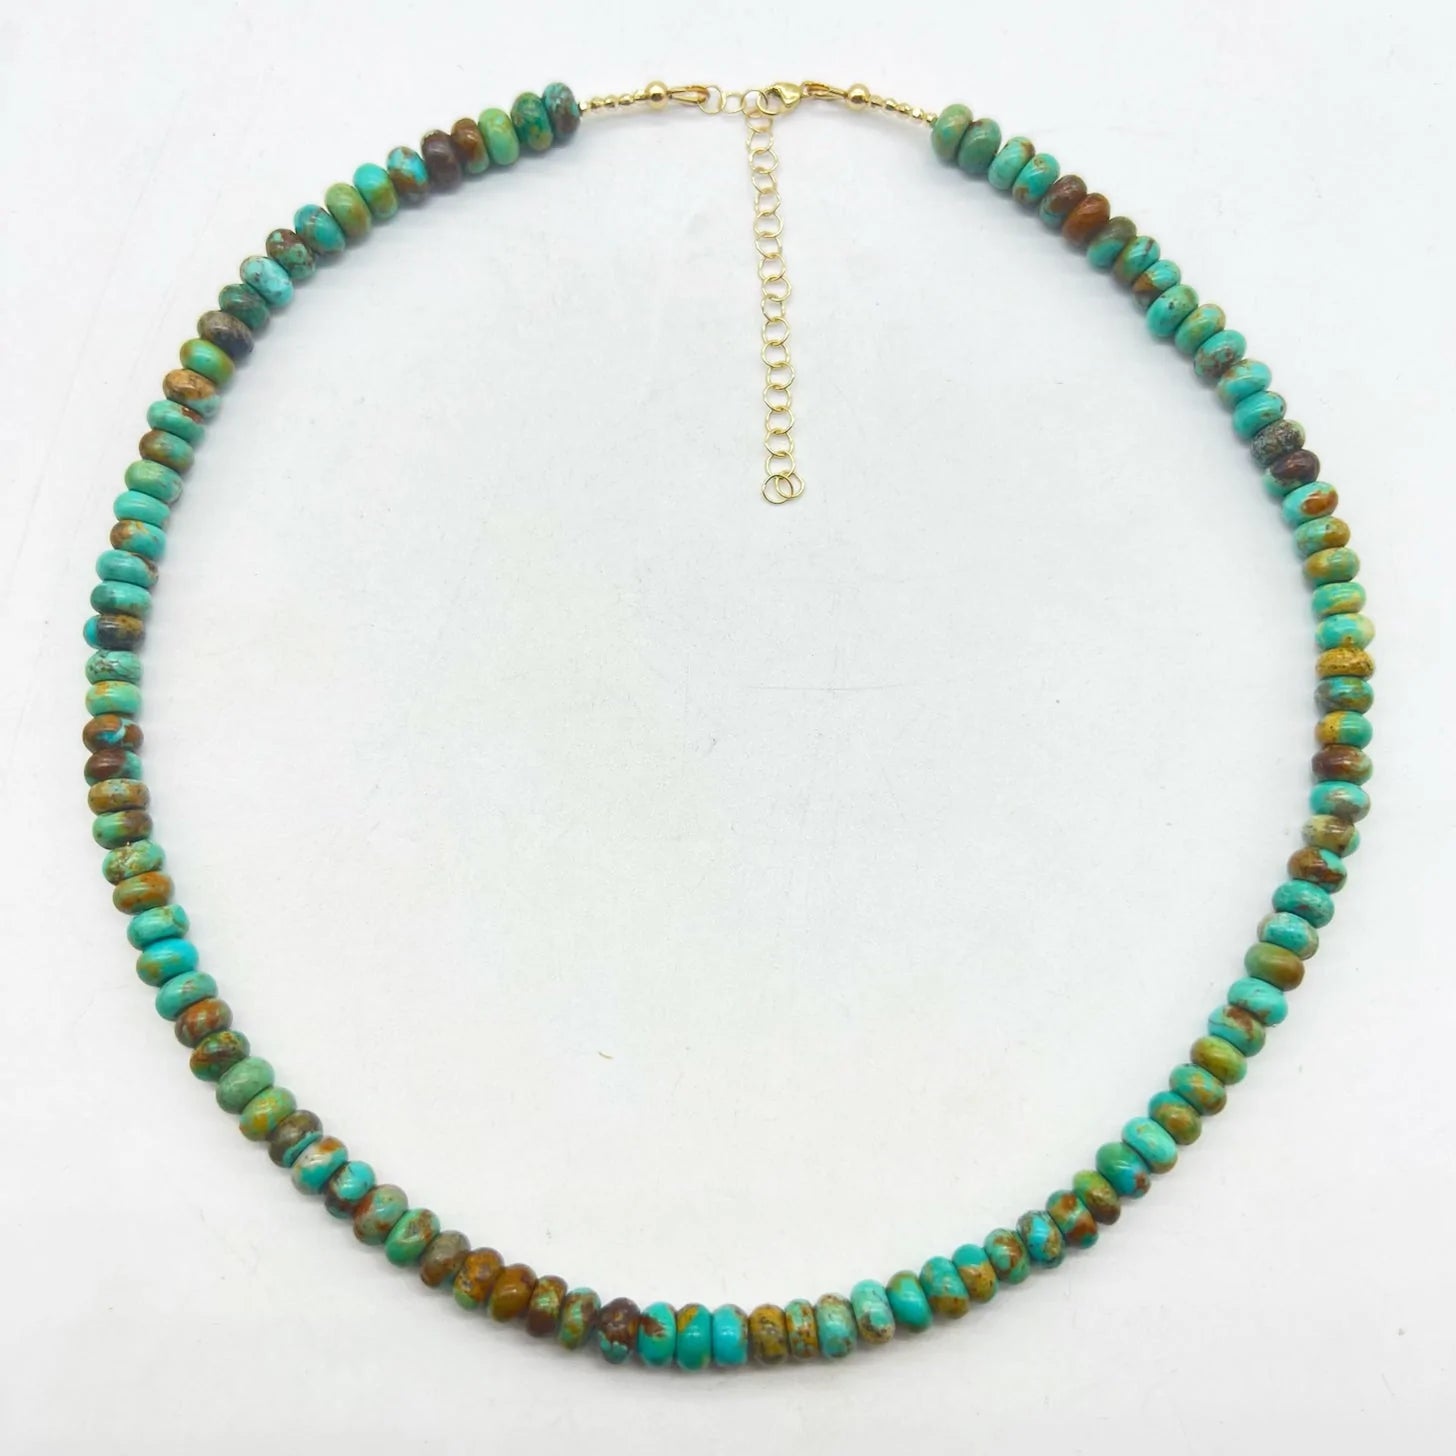 6MM GREEN/BLUE TURQUOISE NECKLACE GIFT